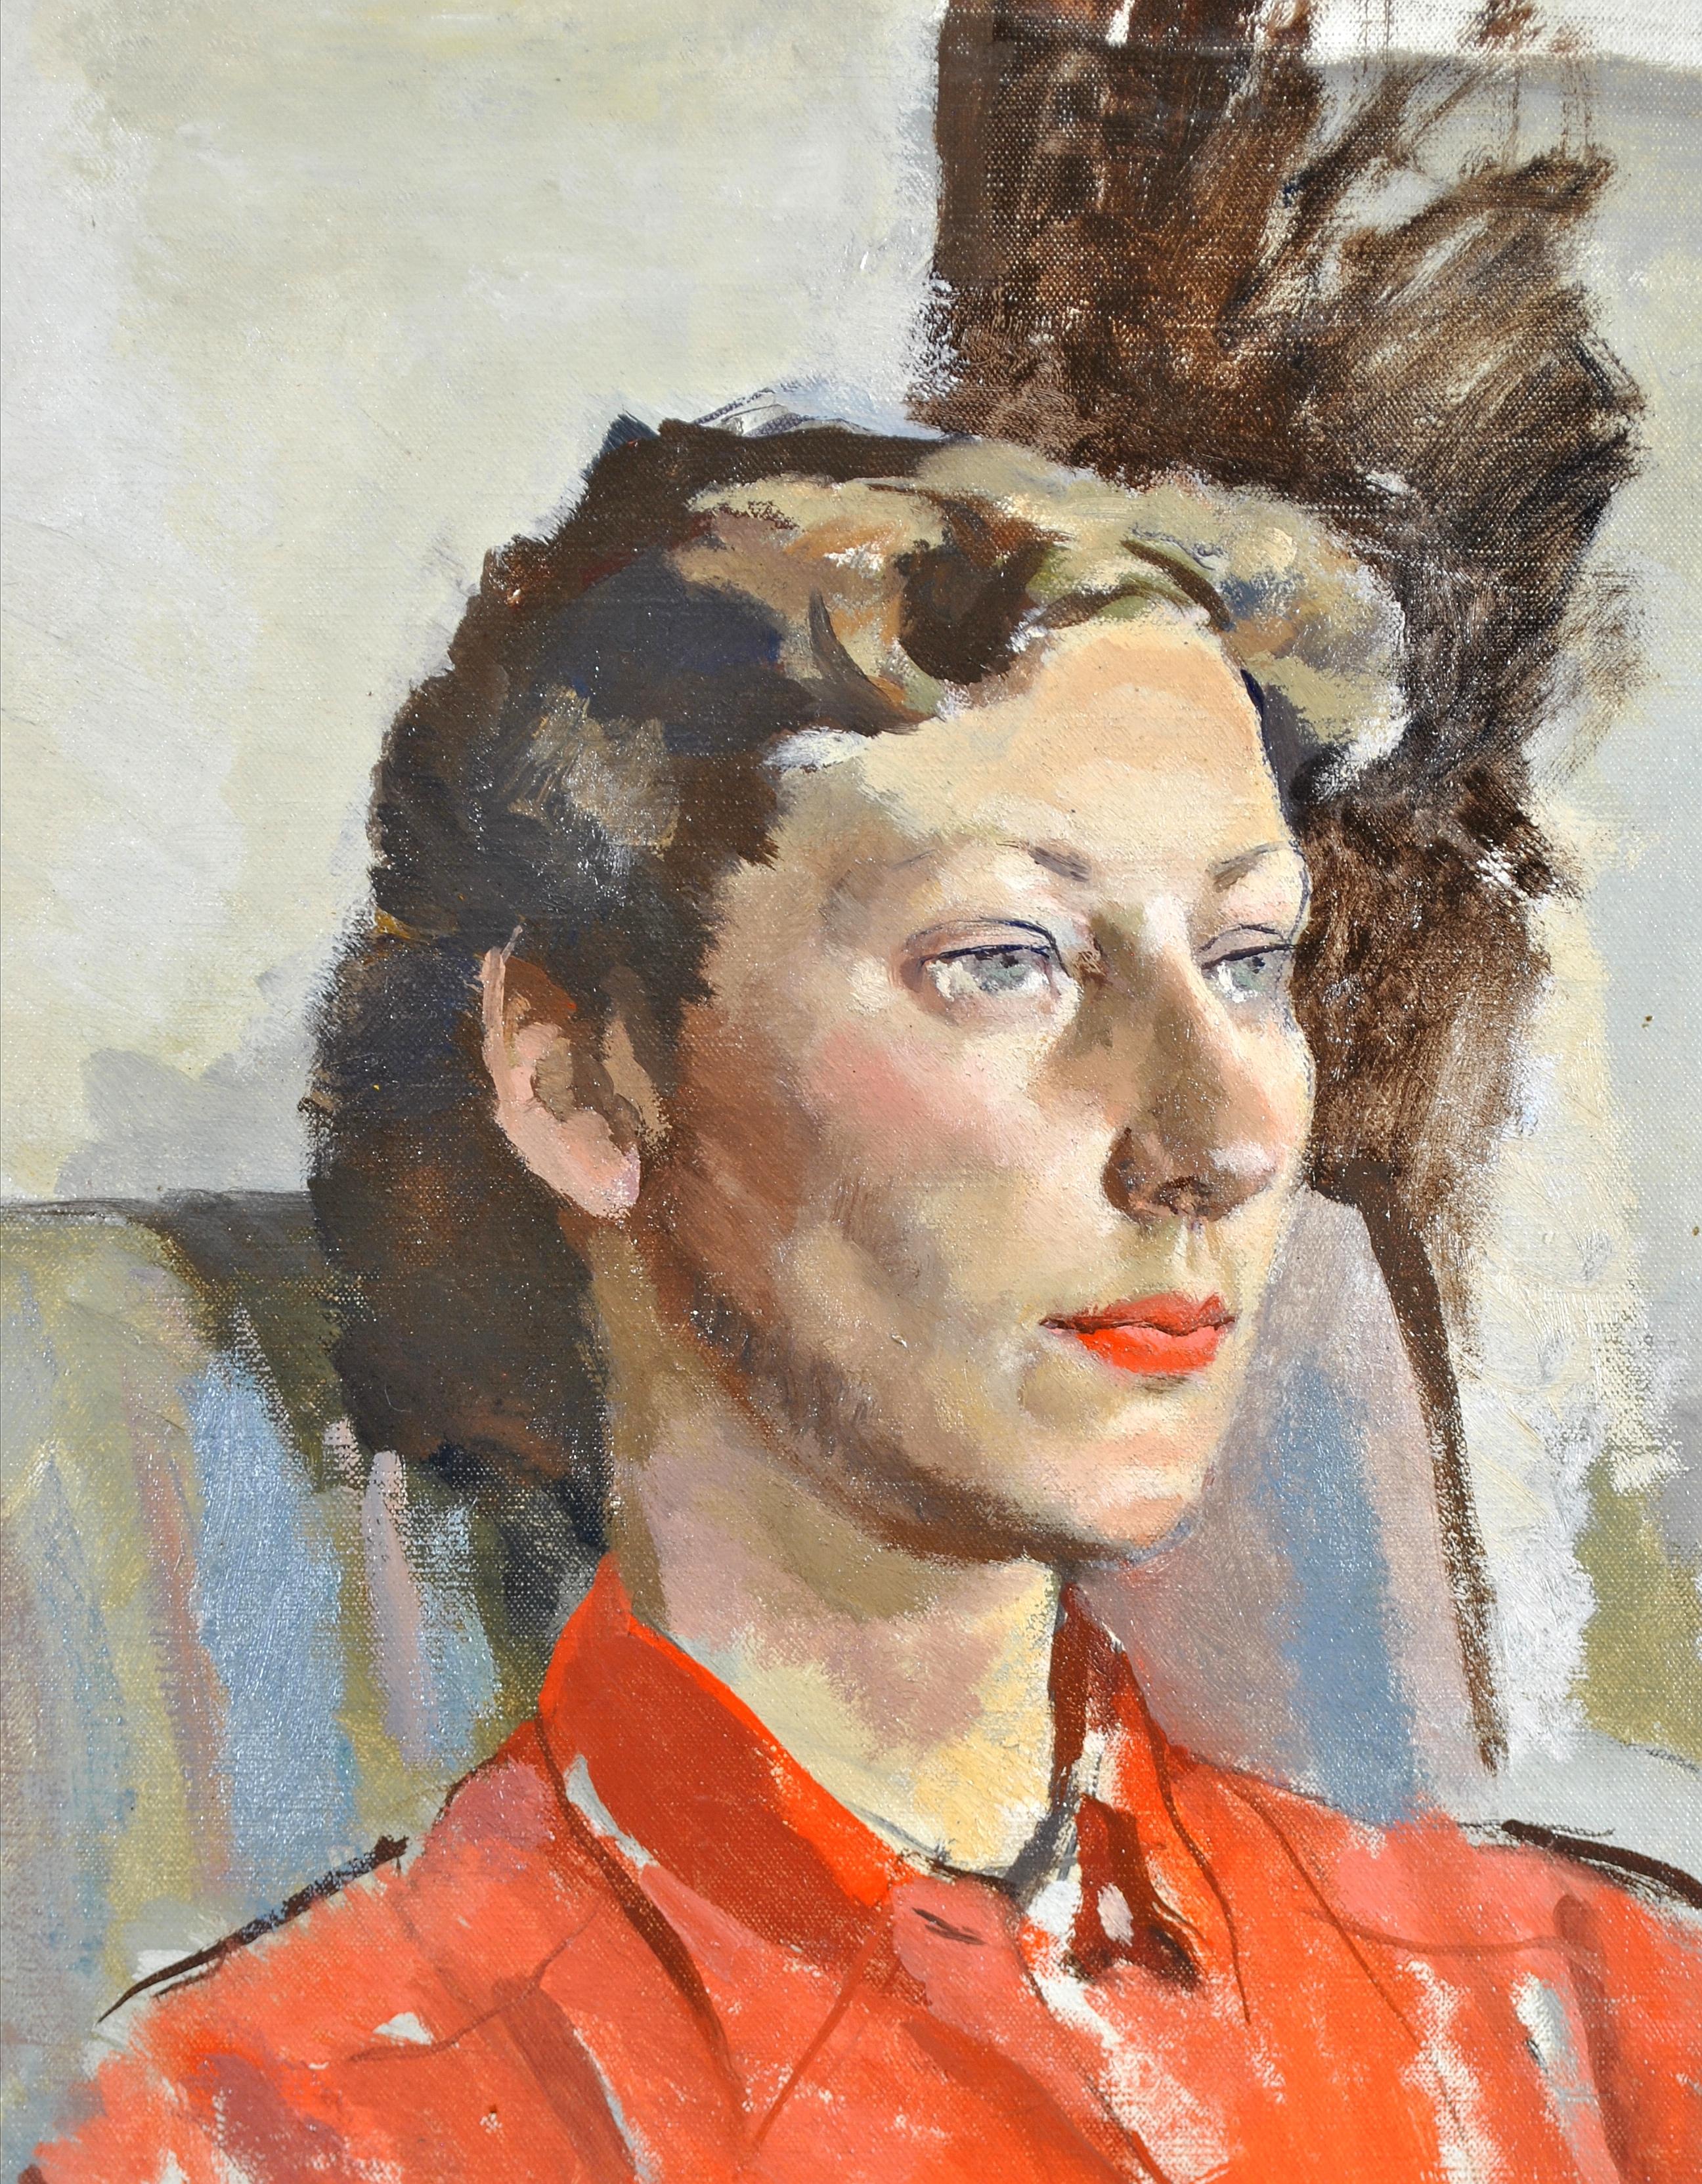 A superb 1930's Modern British oil on canvas portrait of a seated lady wearing a red shirt. The work is very beautiful and whilst unsigned is quite clearly by an artist of very high quality. Presented in a painted wood frame with fabric